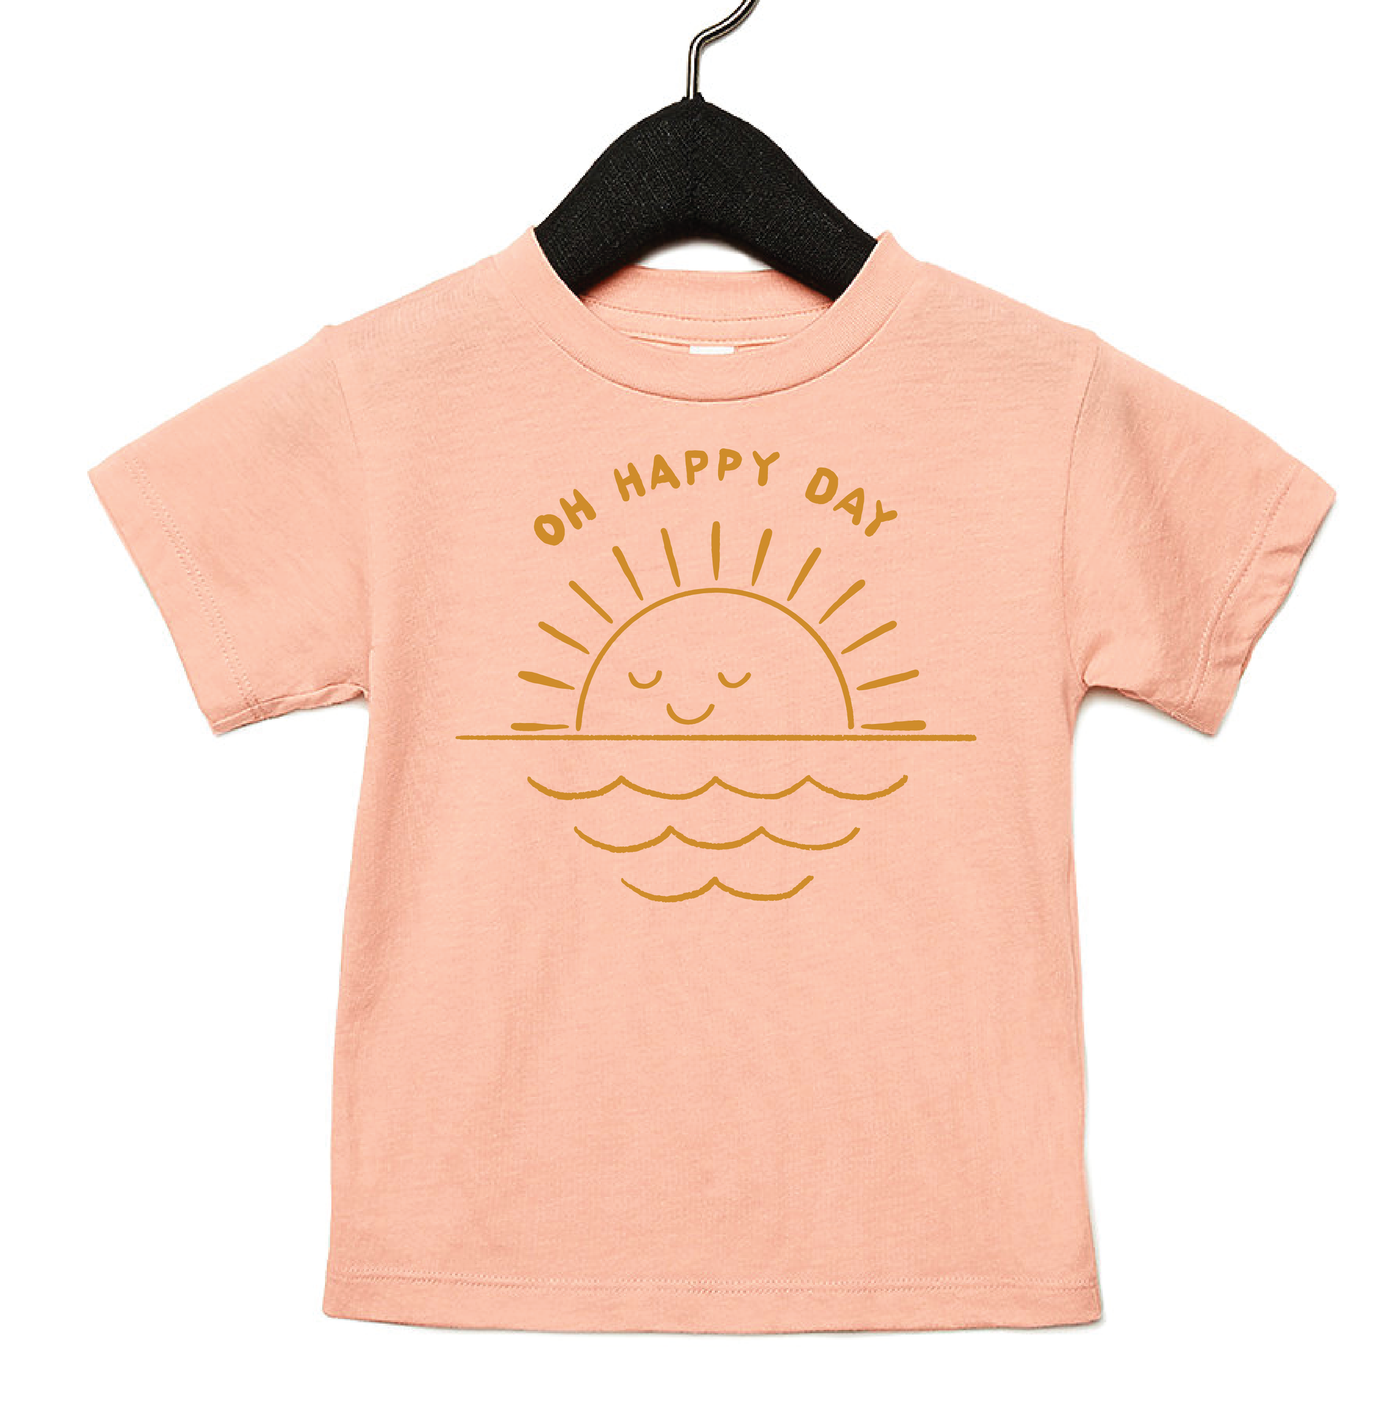 Oh Happy Day Toddler T-Shirt - The Lake and Company